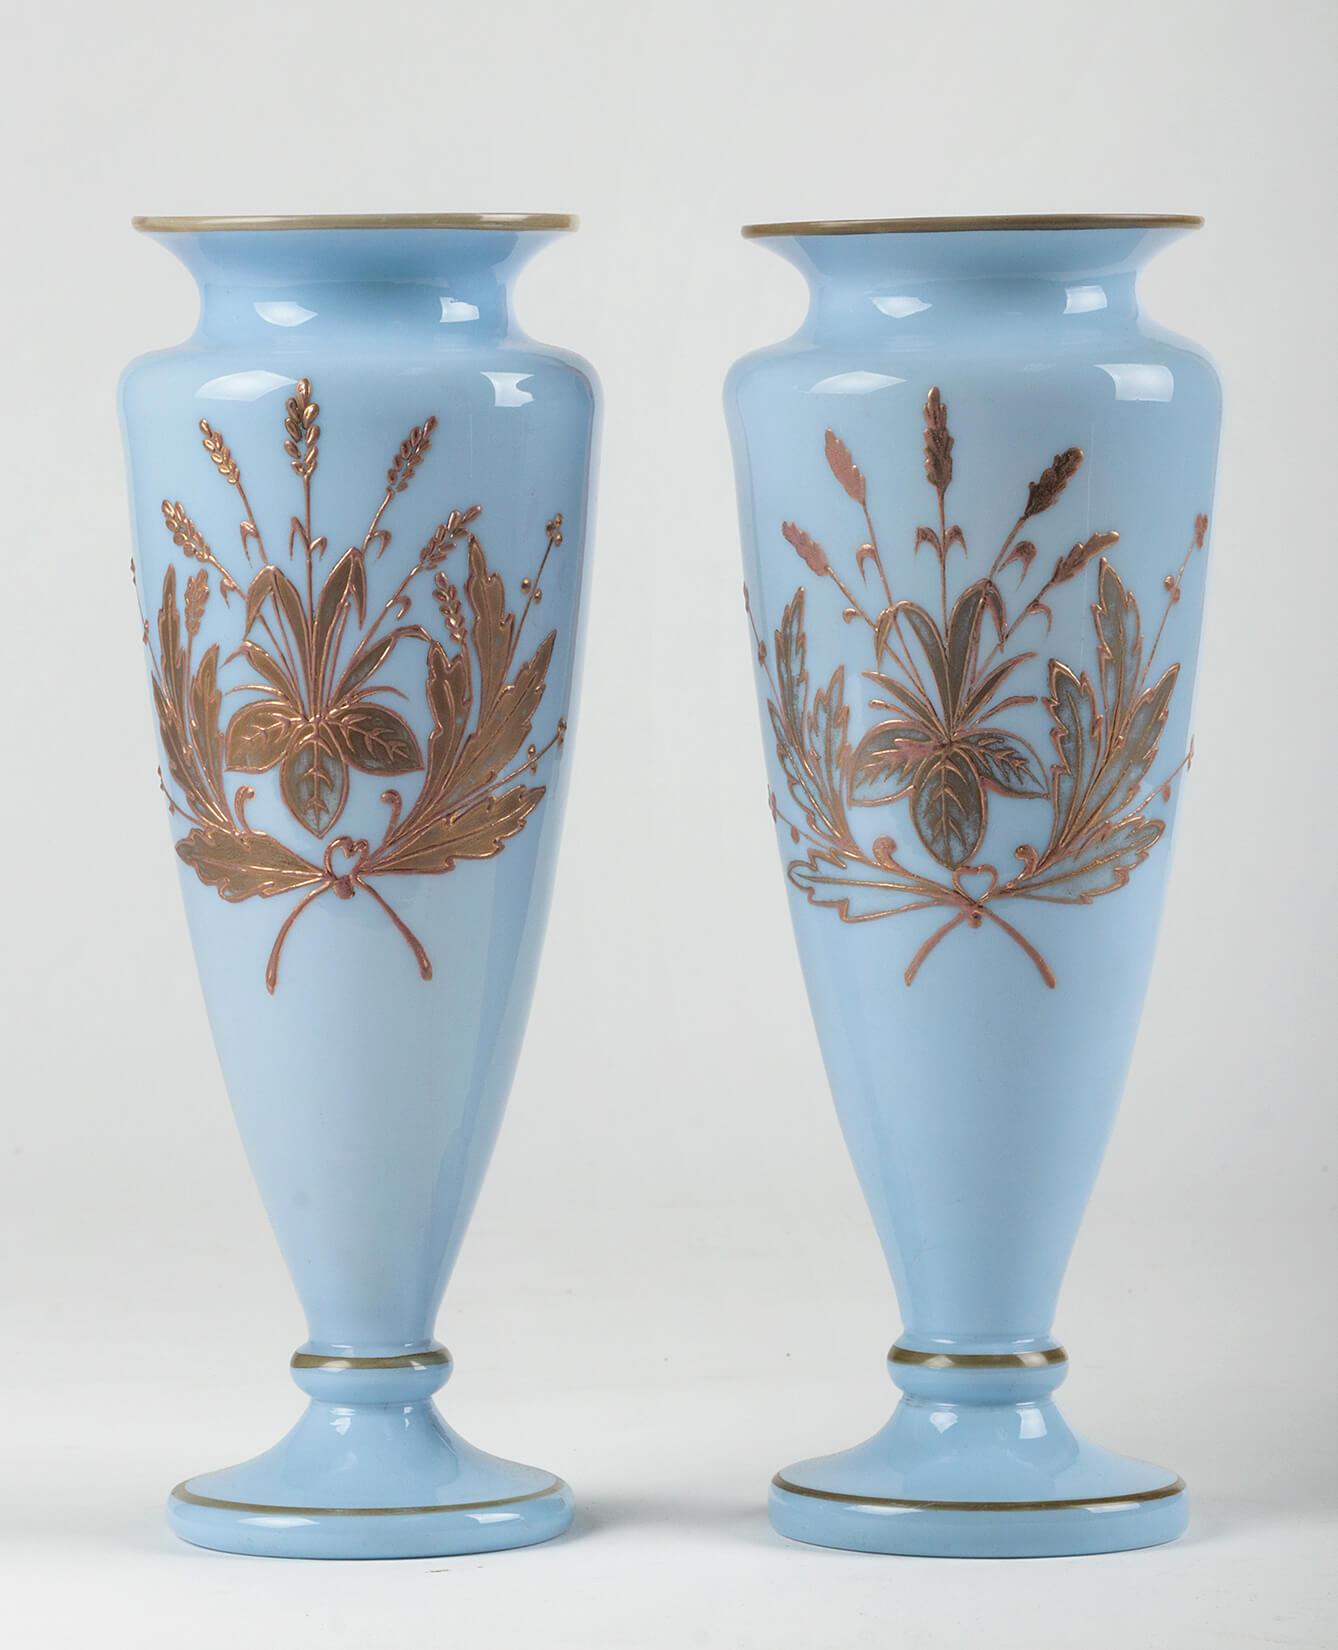 A beautiful pair of antique vases. Made of opaline glass, in a special color that is in between violet-purple and heavenly blue. The vases are hand painted with a relief decoration goldpaint. The edges have simple gold-colored lines and a star is